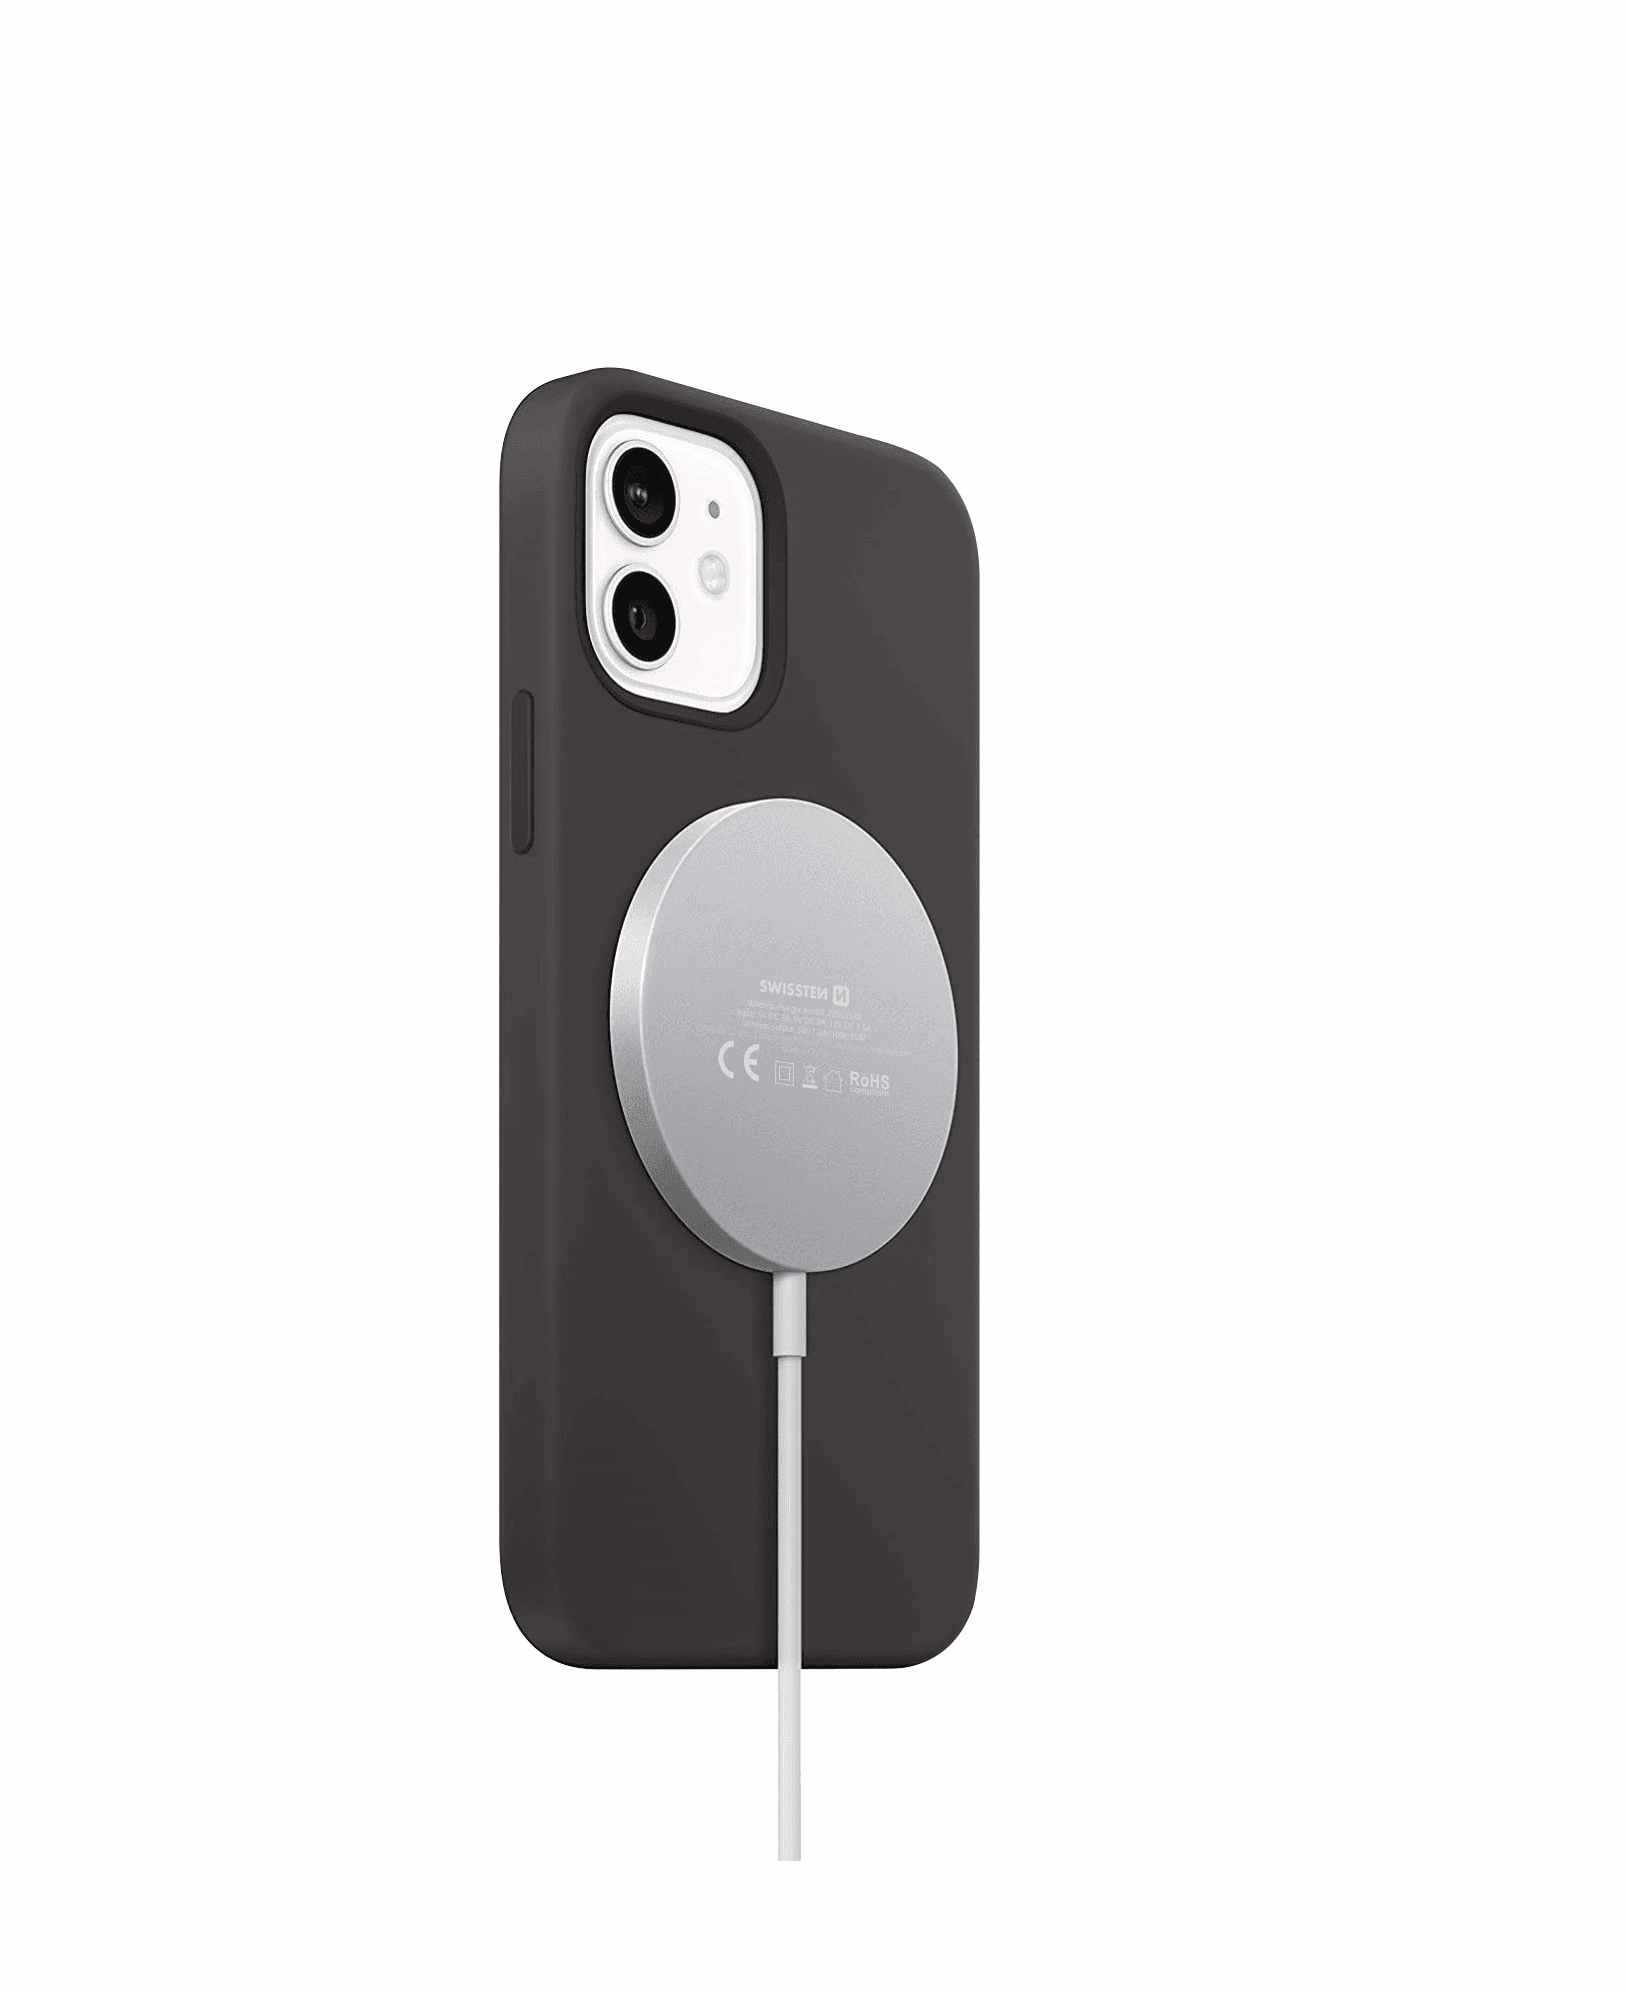 SWISSTEN MagSafe WIRELESS CHARGER FOR APPLE IPHONE MagSafe